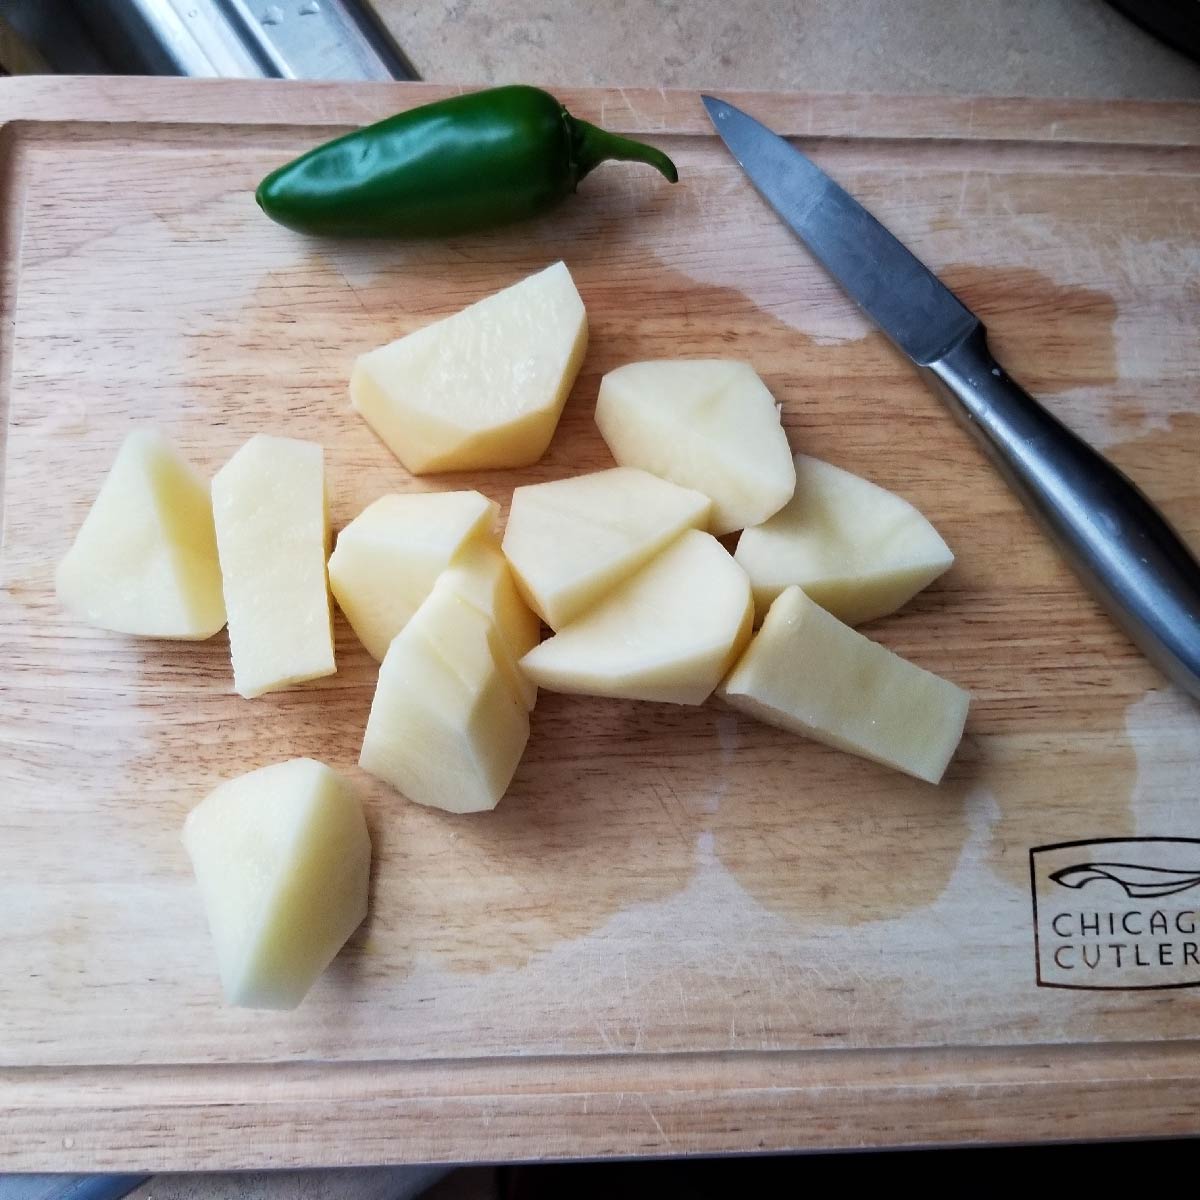 Potatoes cut into chunks about 2 inches by 1 inch thick.